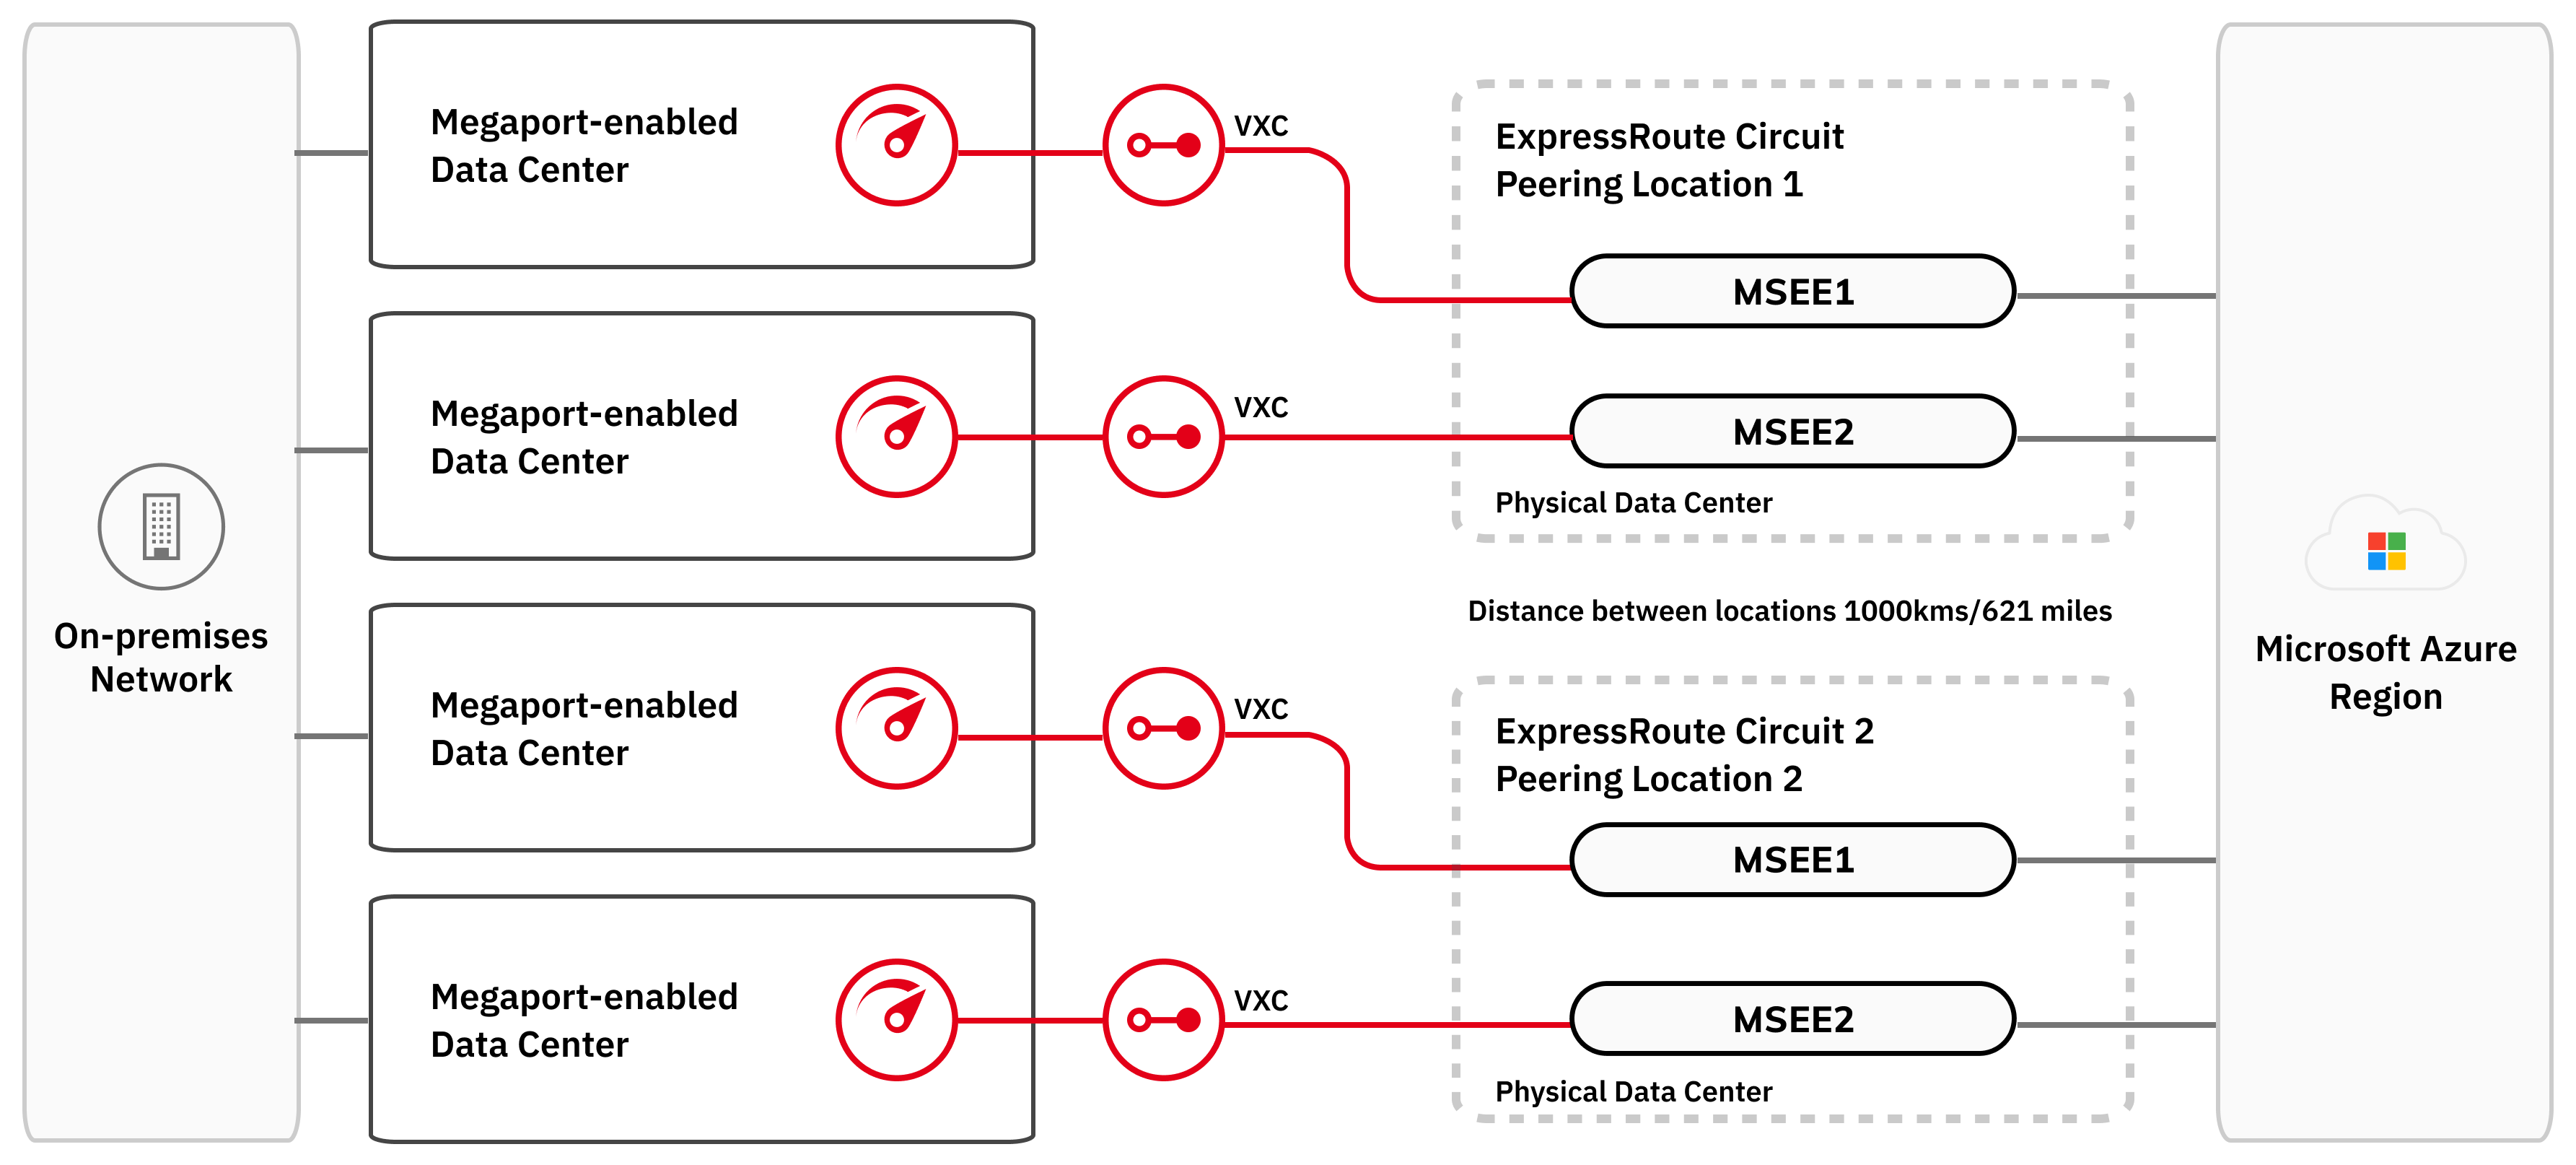 This image shows the structure of ExpressRoute maximum resiliency. On the left is the customer on-premises network. This is linked to Ports in four separate Megaport enabled data centers. These Ports are linked by VXC to MSEEs in two separate ExpressRoute peering locations. The ExpressRoute peering locations are 1000kms/621 miles apart. Each peering location has two MSEEs. Each of the four Ports is linked to an MSEE by a VXC.